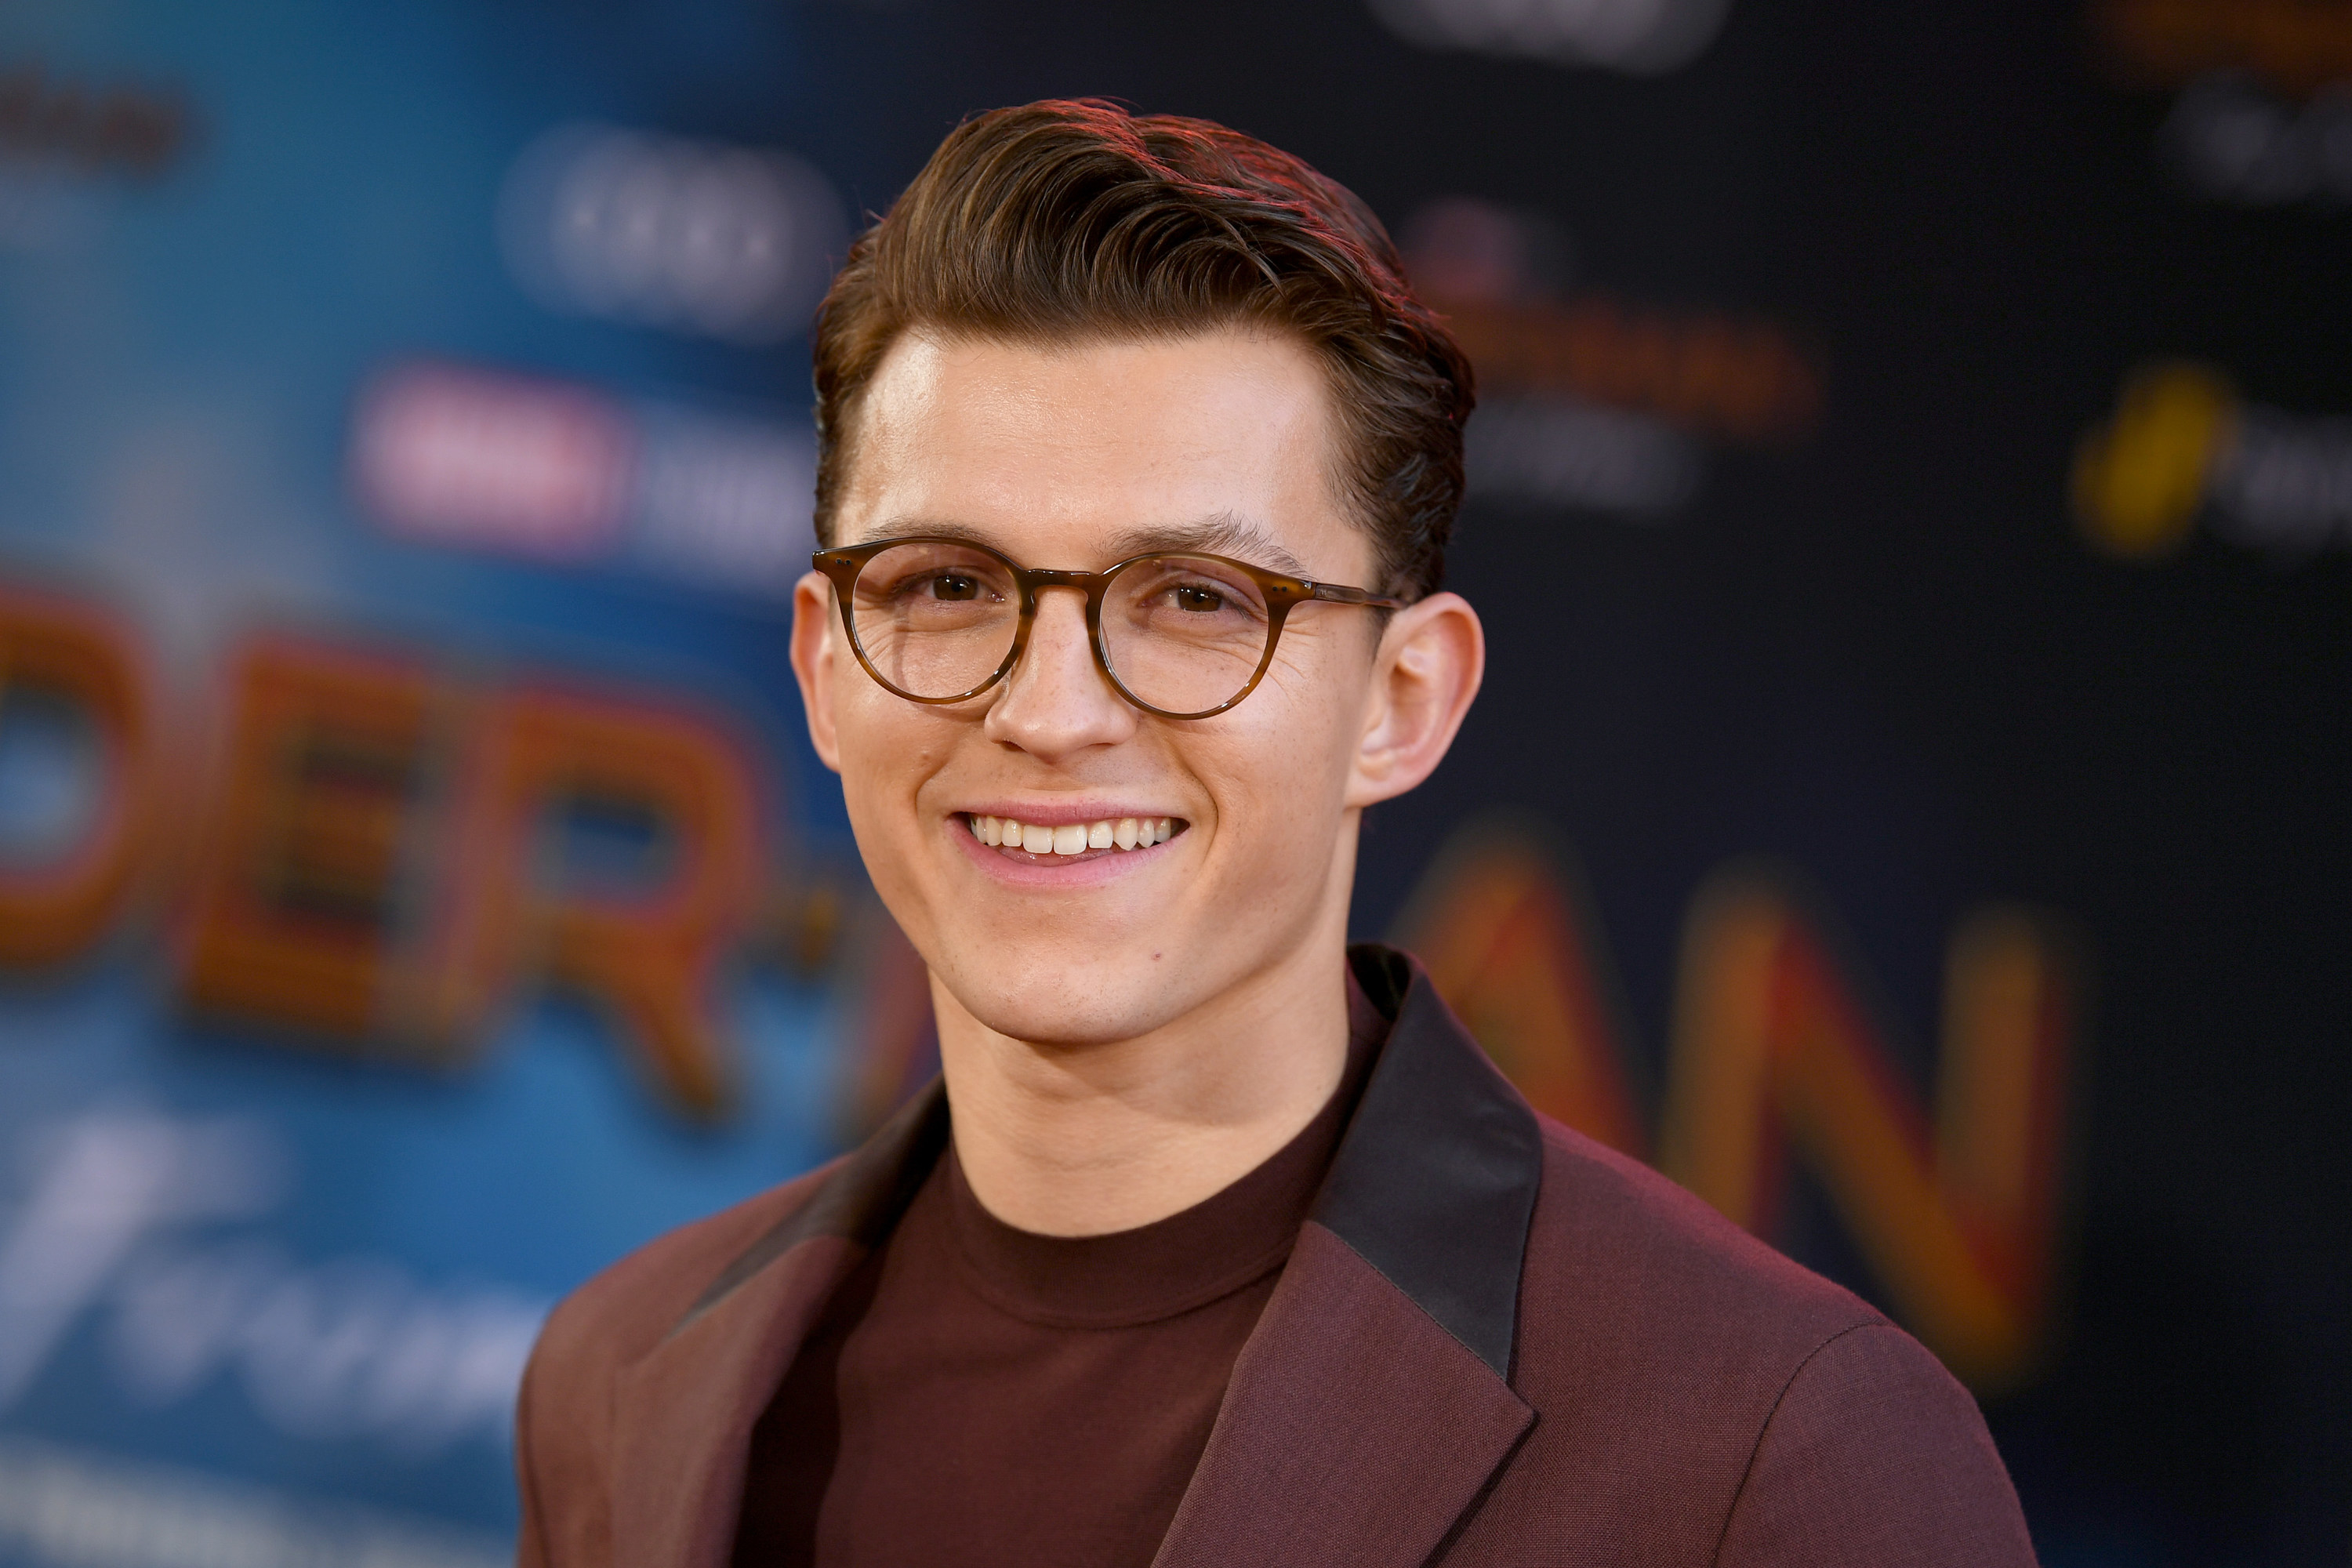 Close-up of Tom wearing glasses and smiling